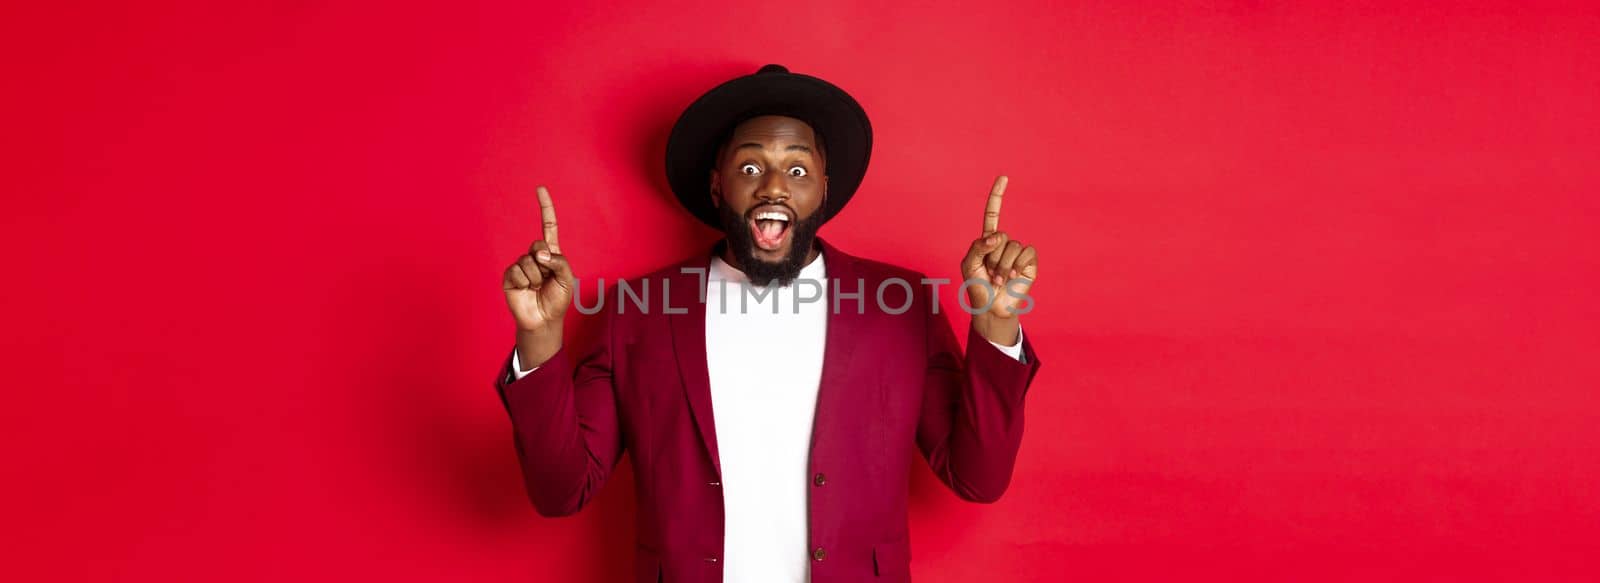 Winter holidays and shopping concept. Cheerful african american man in party outfit pointing fingers up, showing logo and smiling happy, red background.